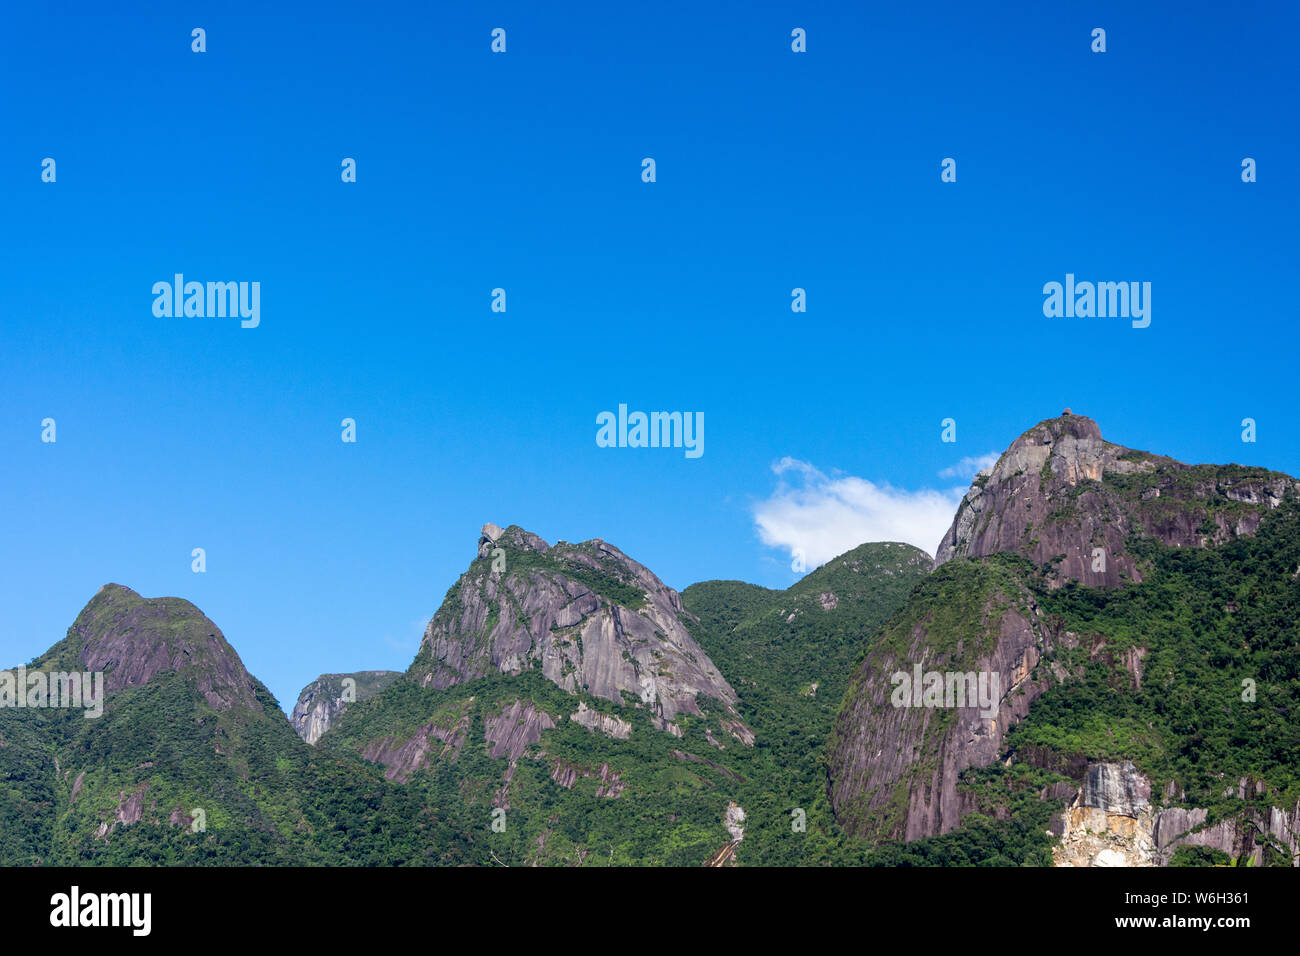 Beautiful landscape of mountains with Organs Mountain highlighted Stock Photo